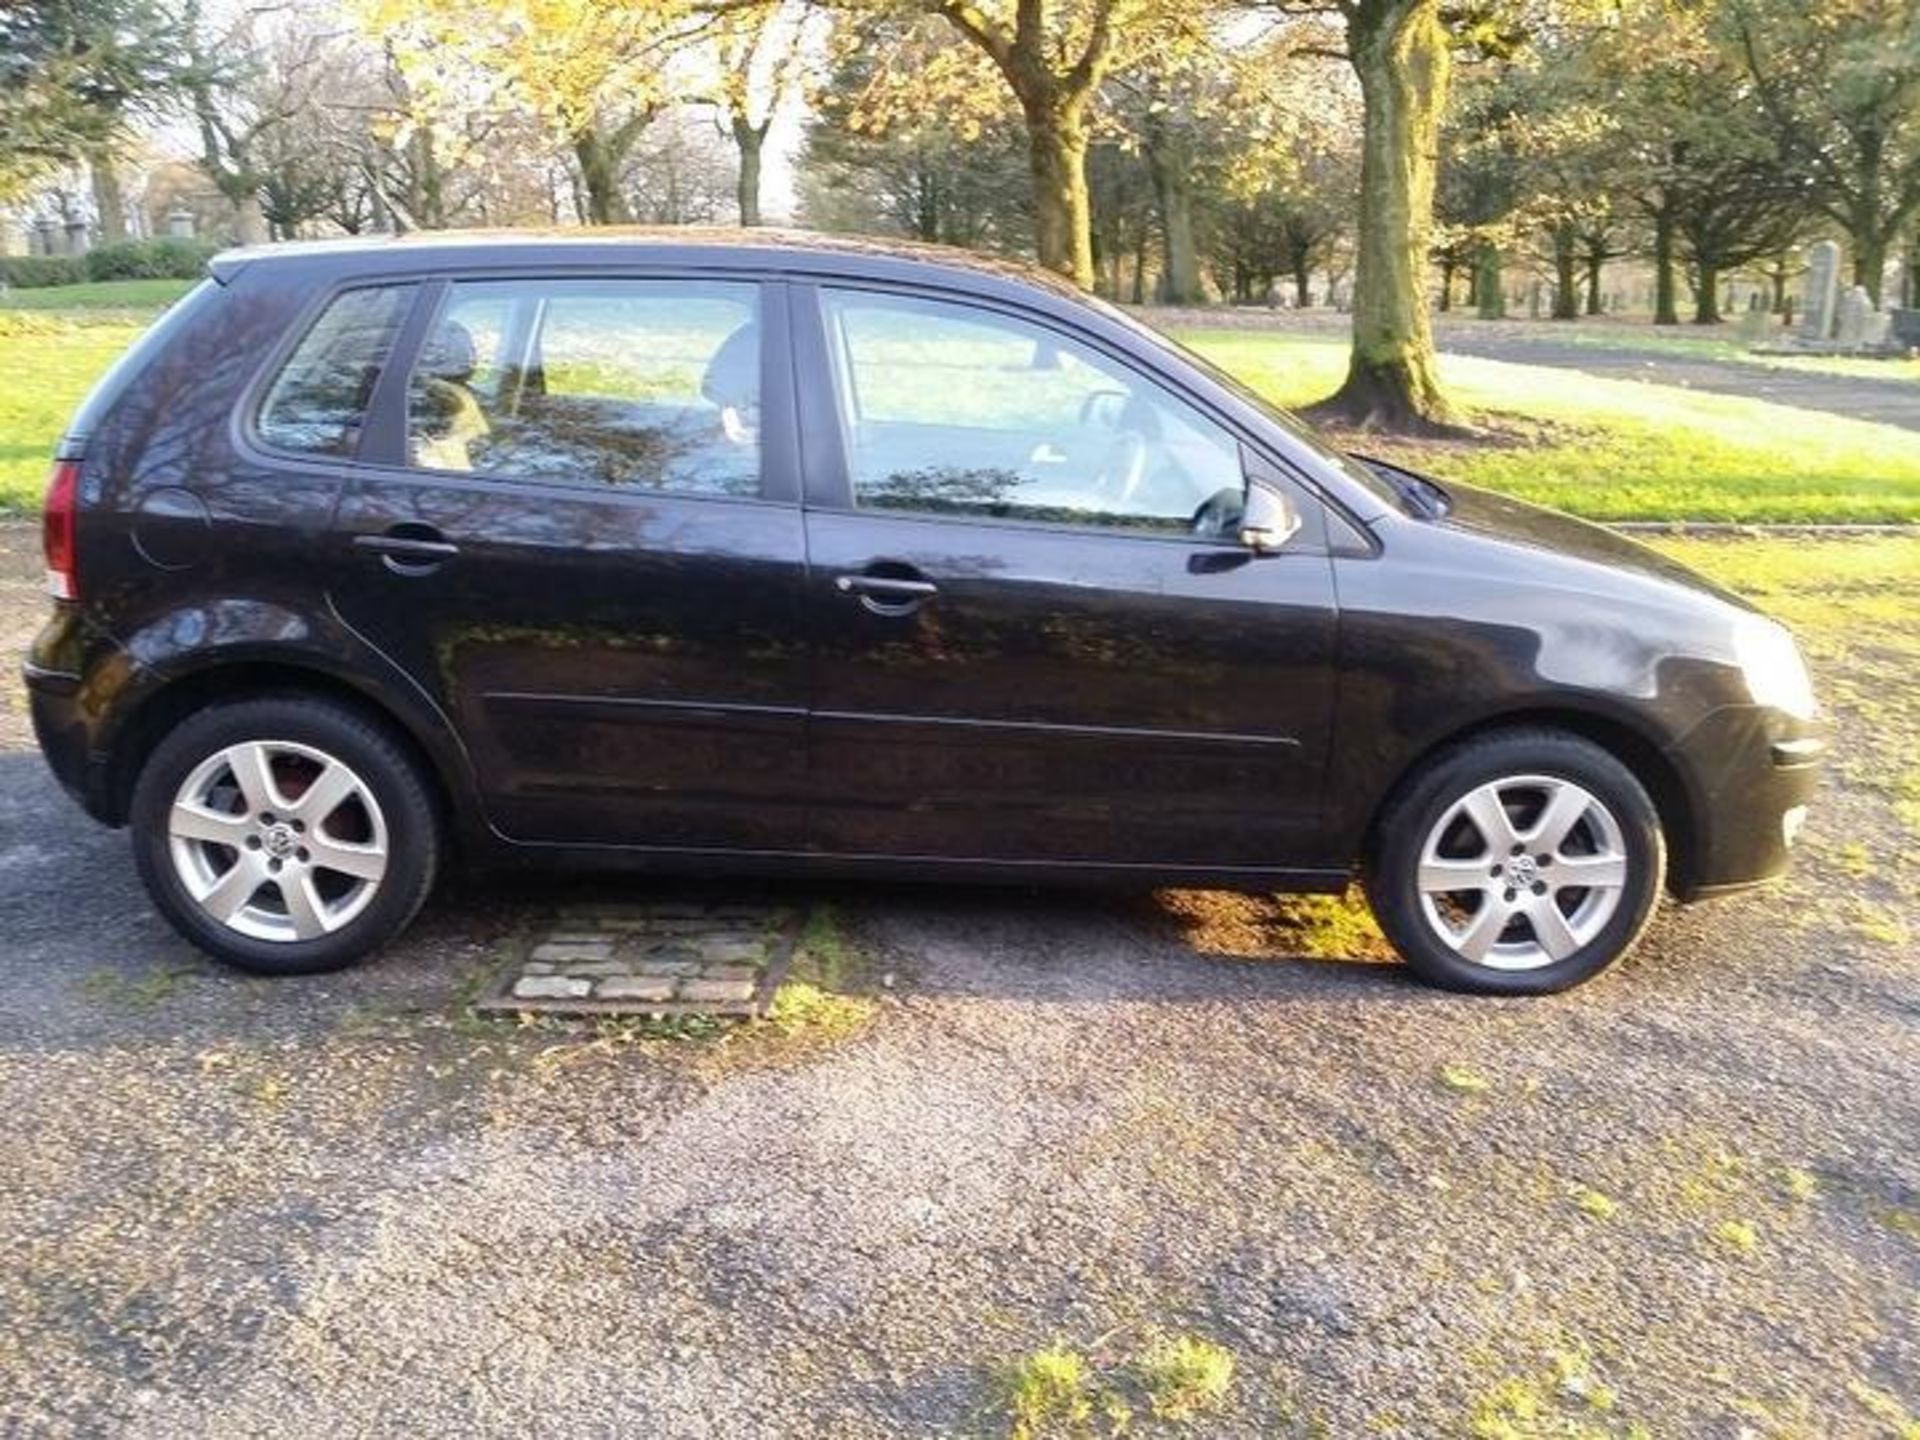 VOLKSWAGEN, POLO 1-2 MATCH, AB08 SYJ, 1-2 LTR, PETROL, MANUAL, 4 DOOR HATCH, 06.06.2008, CURRENT - Image 7 of 16